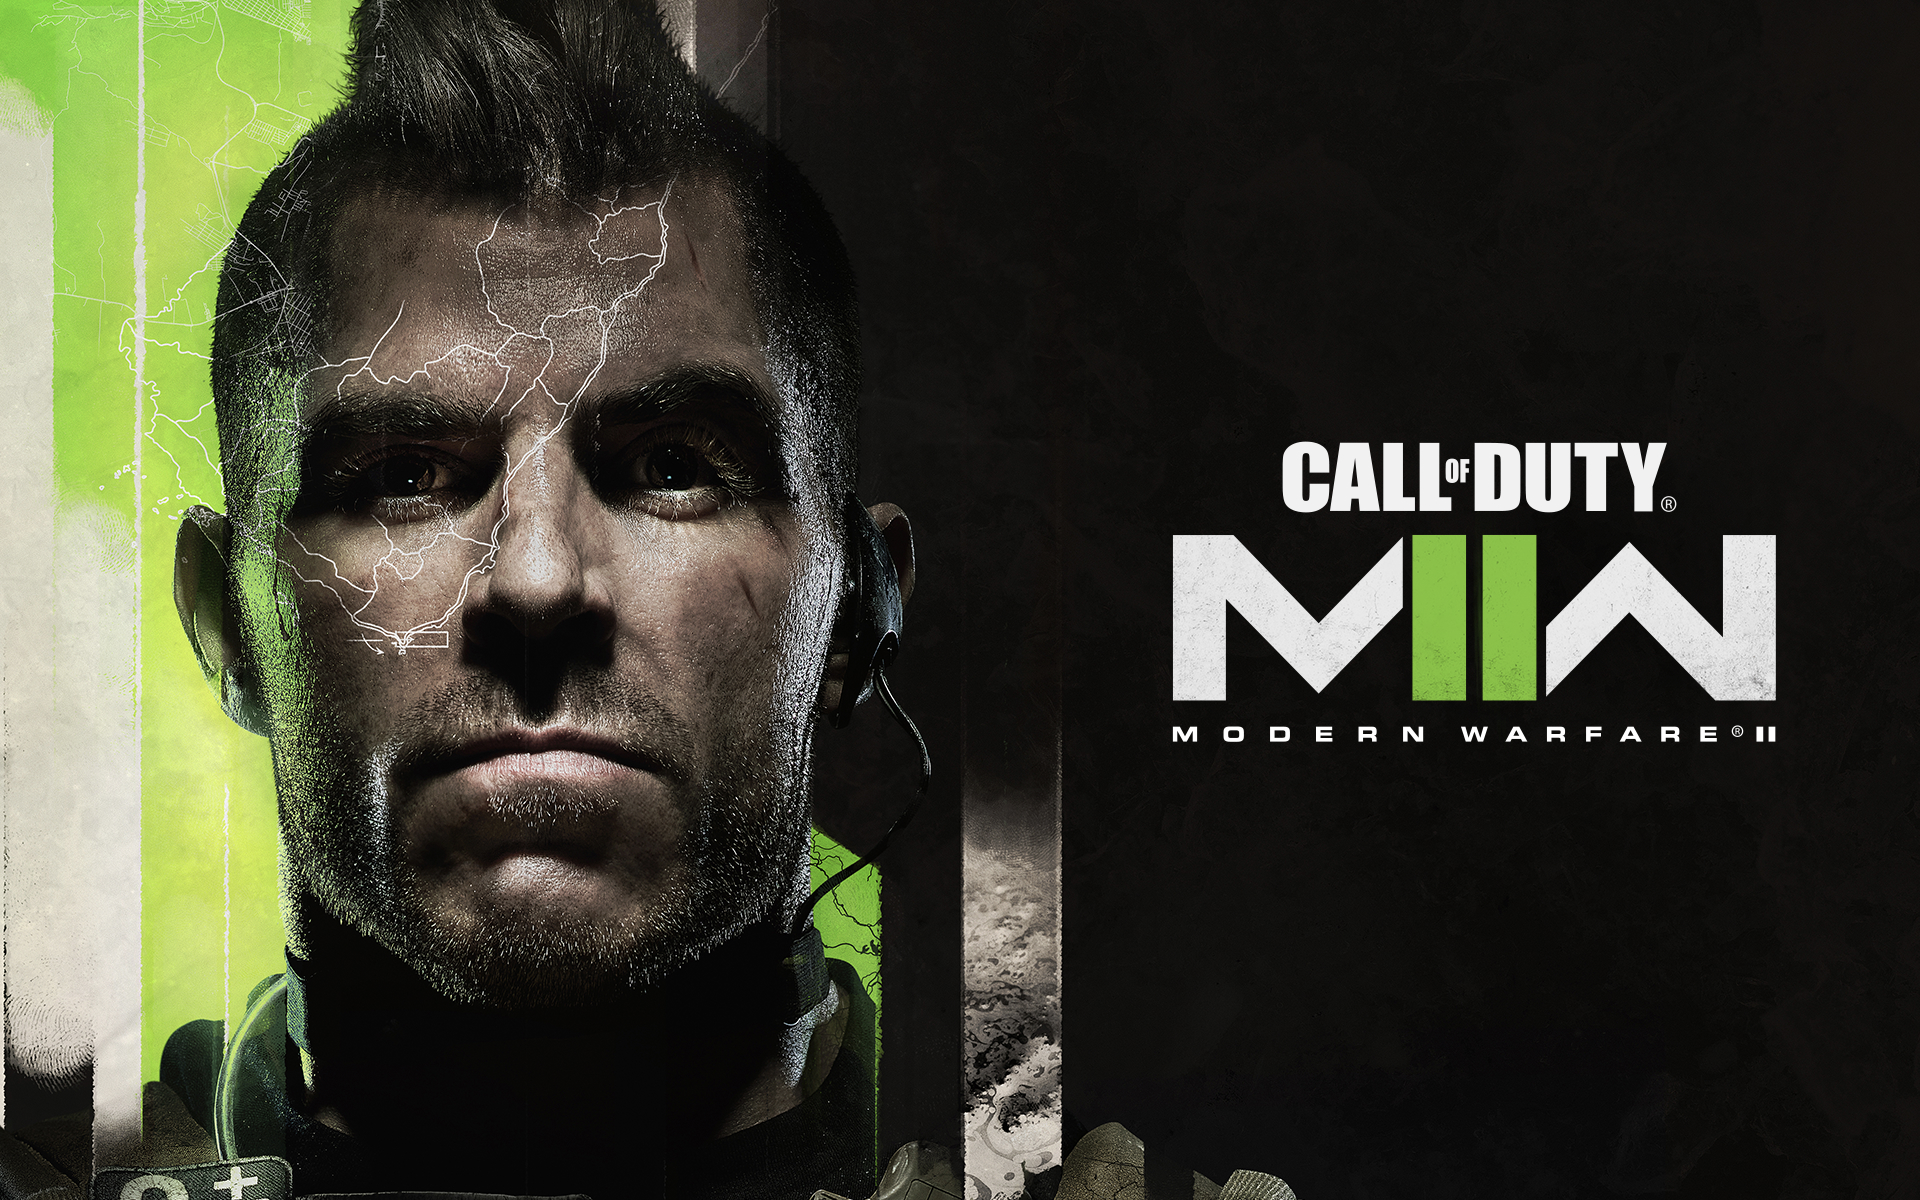 The Making of Call of Duty®: Modern Warfare® art book is available today,  October 22!